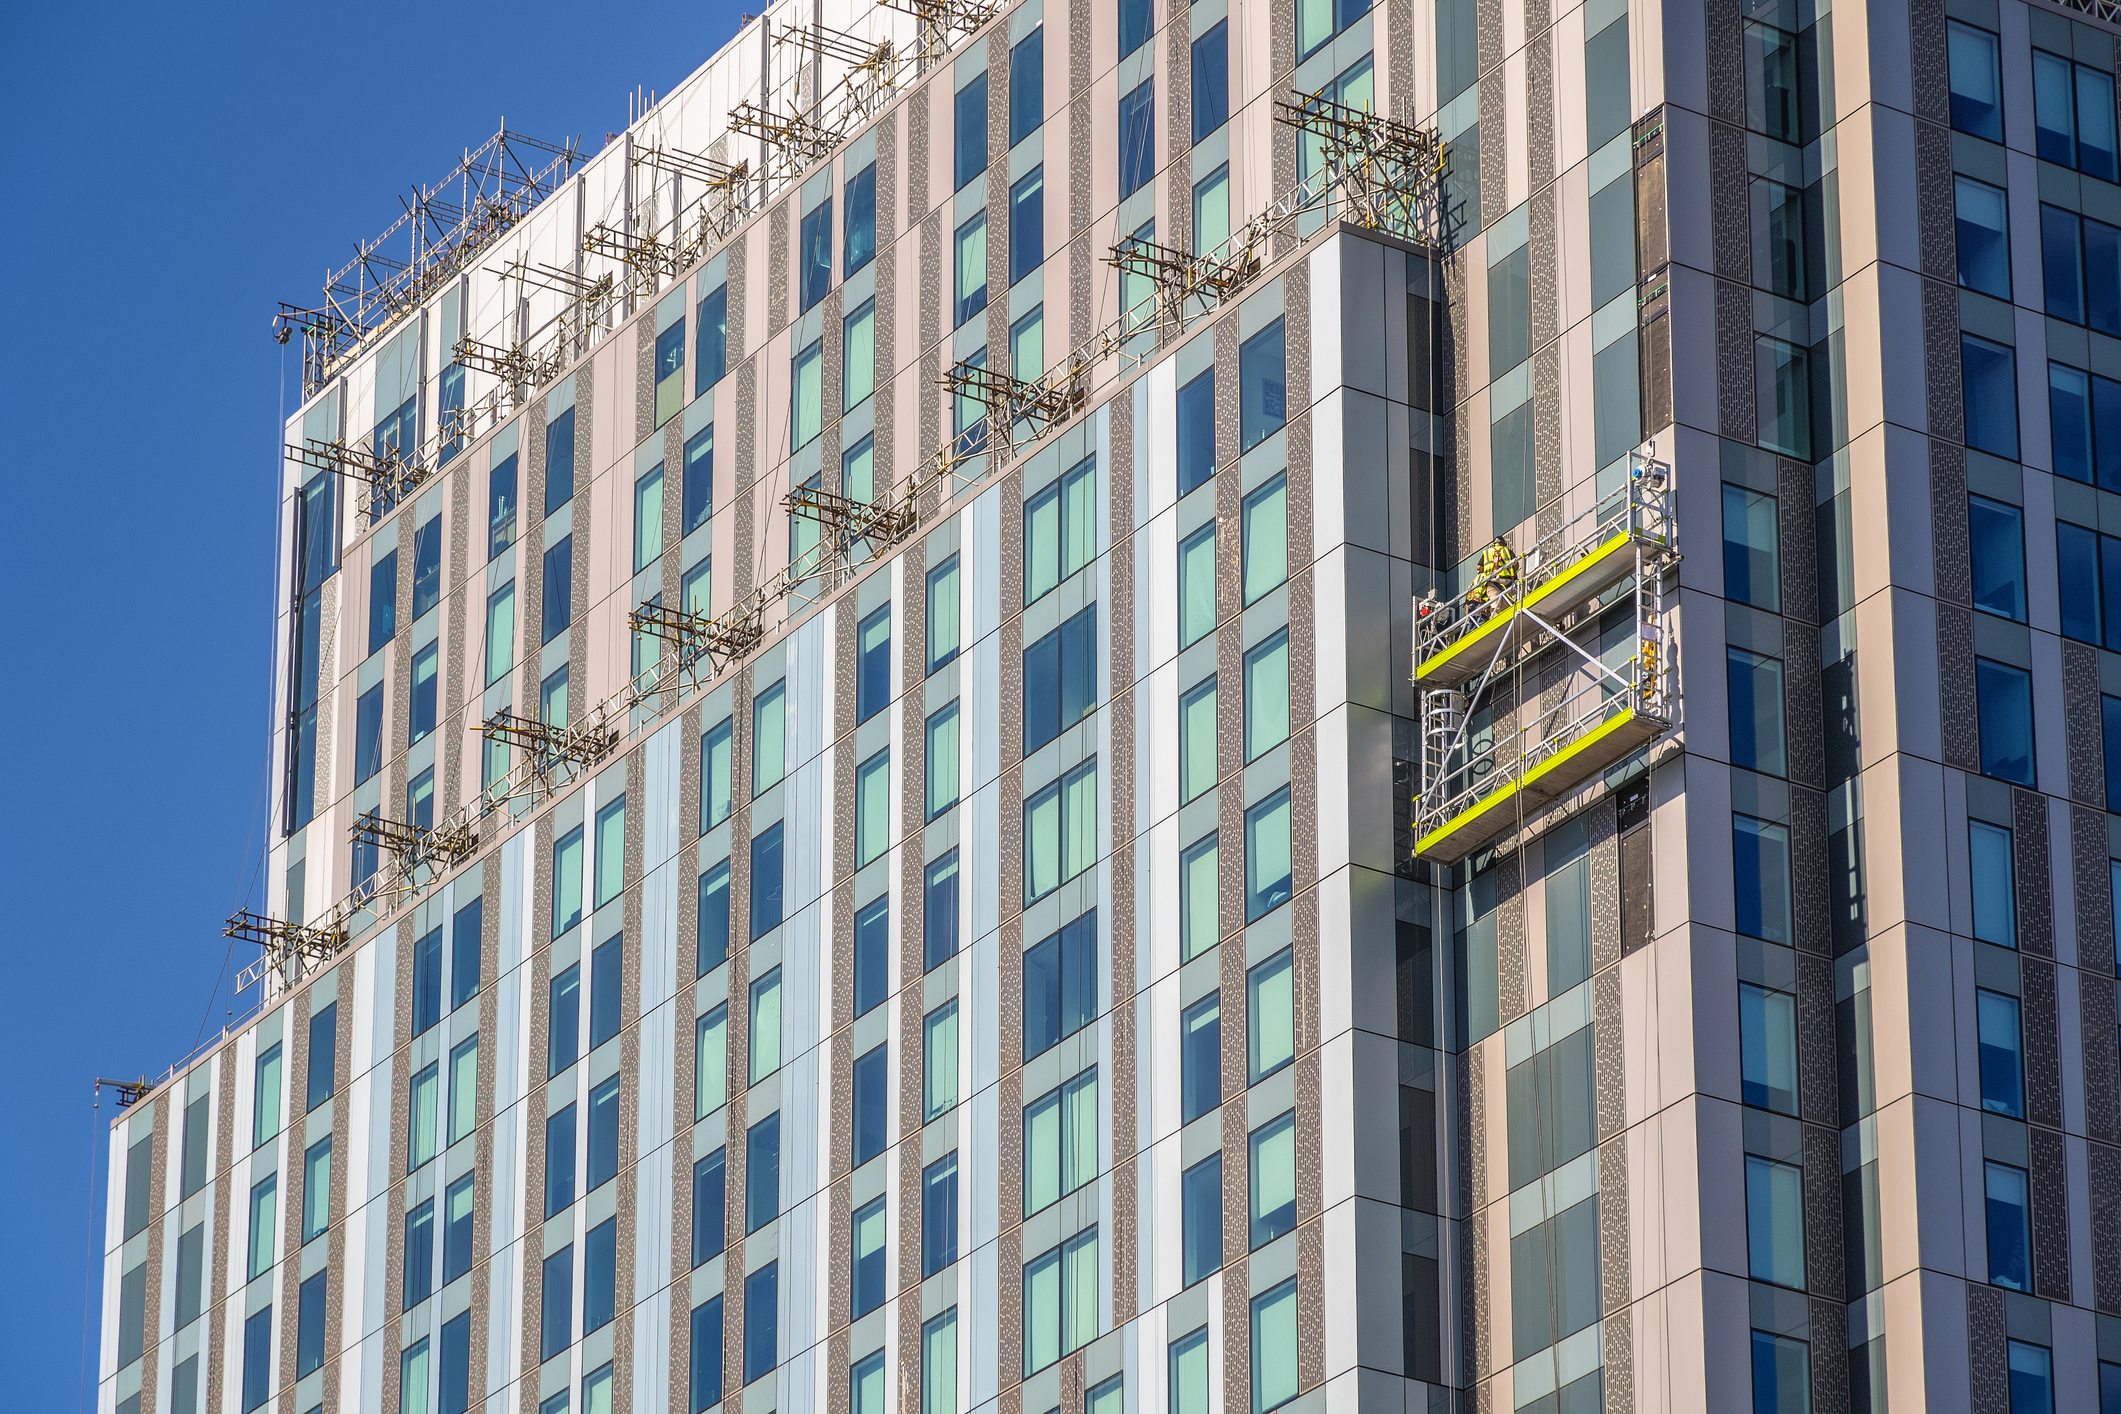 Construction workers on a building implementing cladding